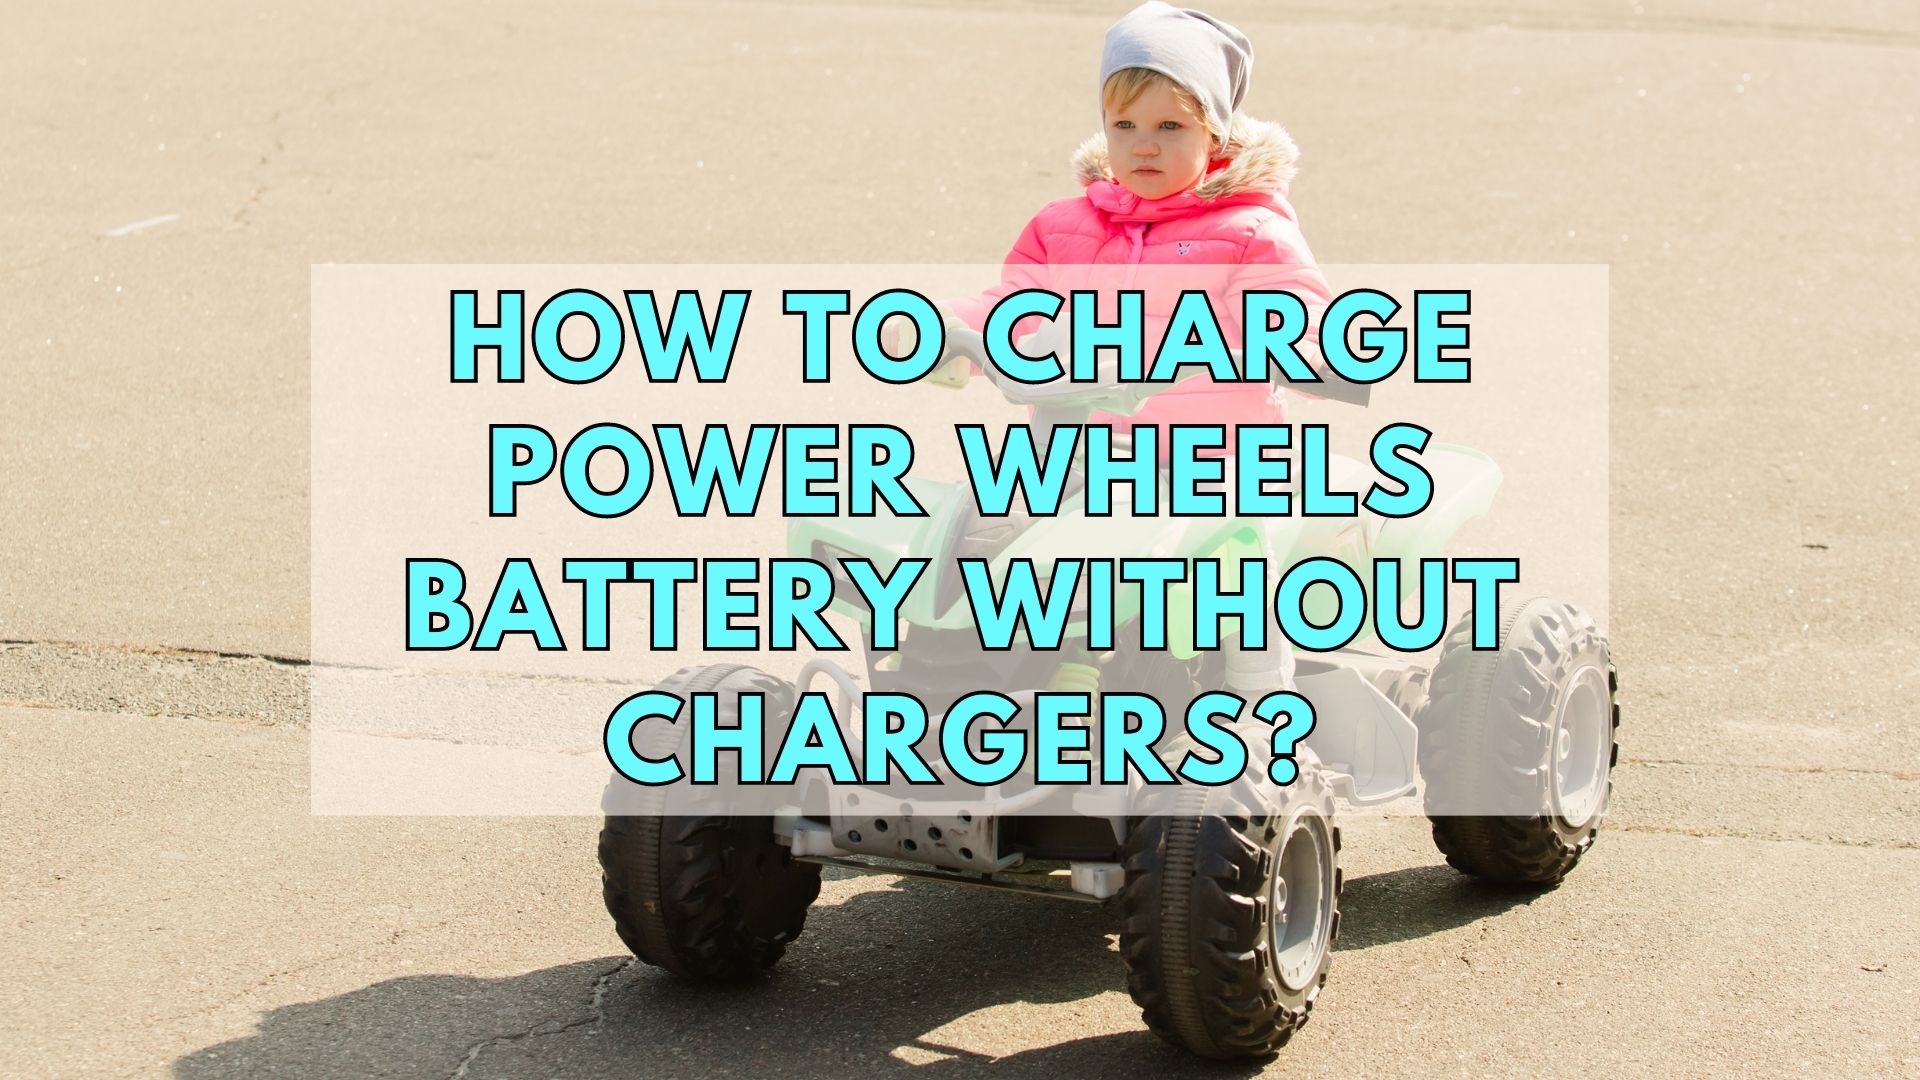 How To Charge Power Wheels Battery Without Chargers